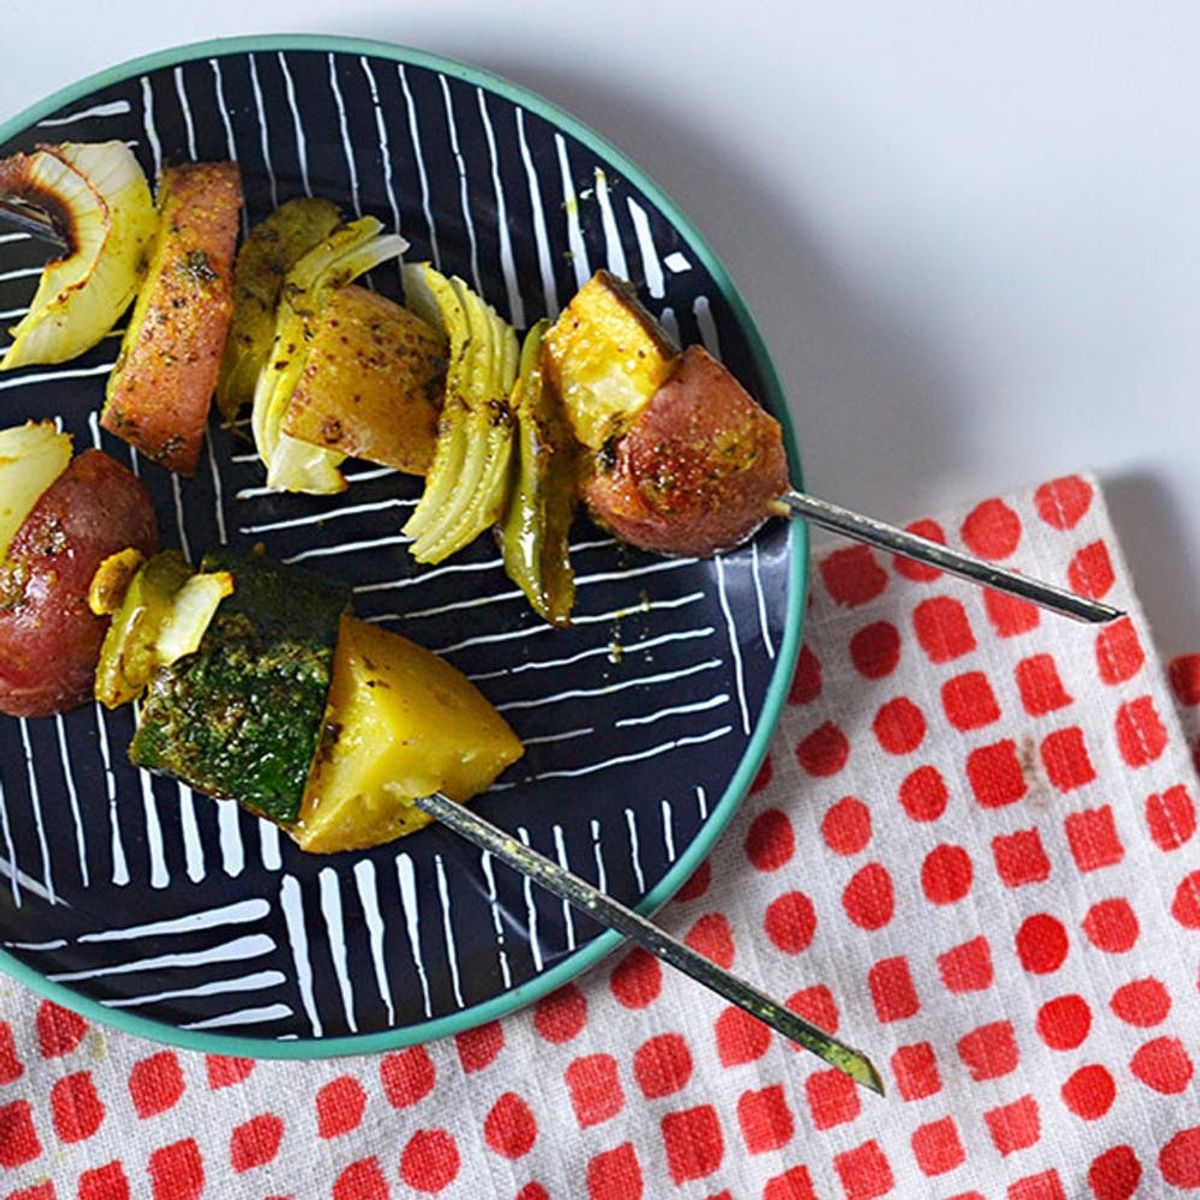 These Grilled Vegetable Skewers Are the Perfect Thanksgiving Side Dish